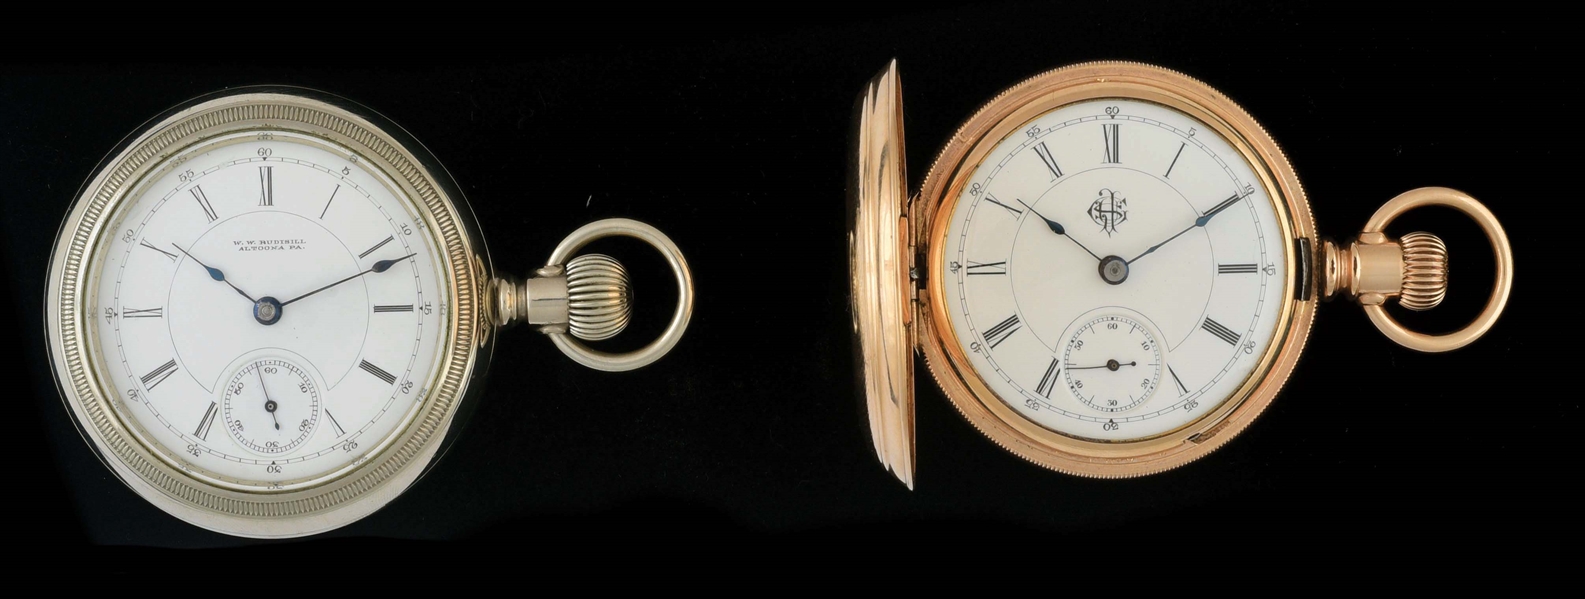 LOT OF 2: AURORA WATCH CO. PRIVATE LABEL SIZE 18 POCKET WATCHES.